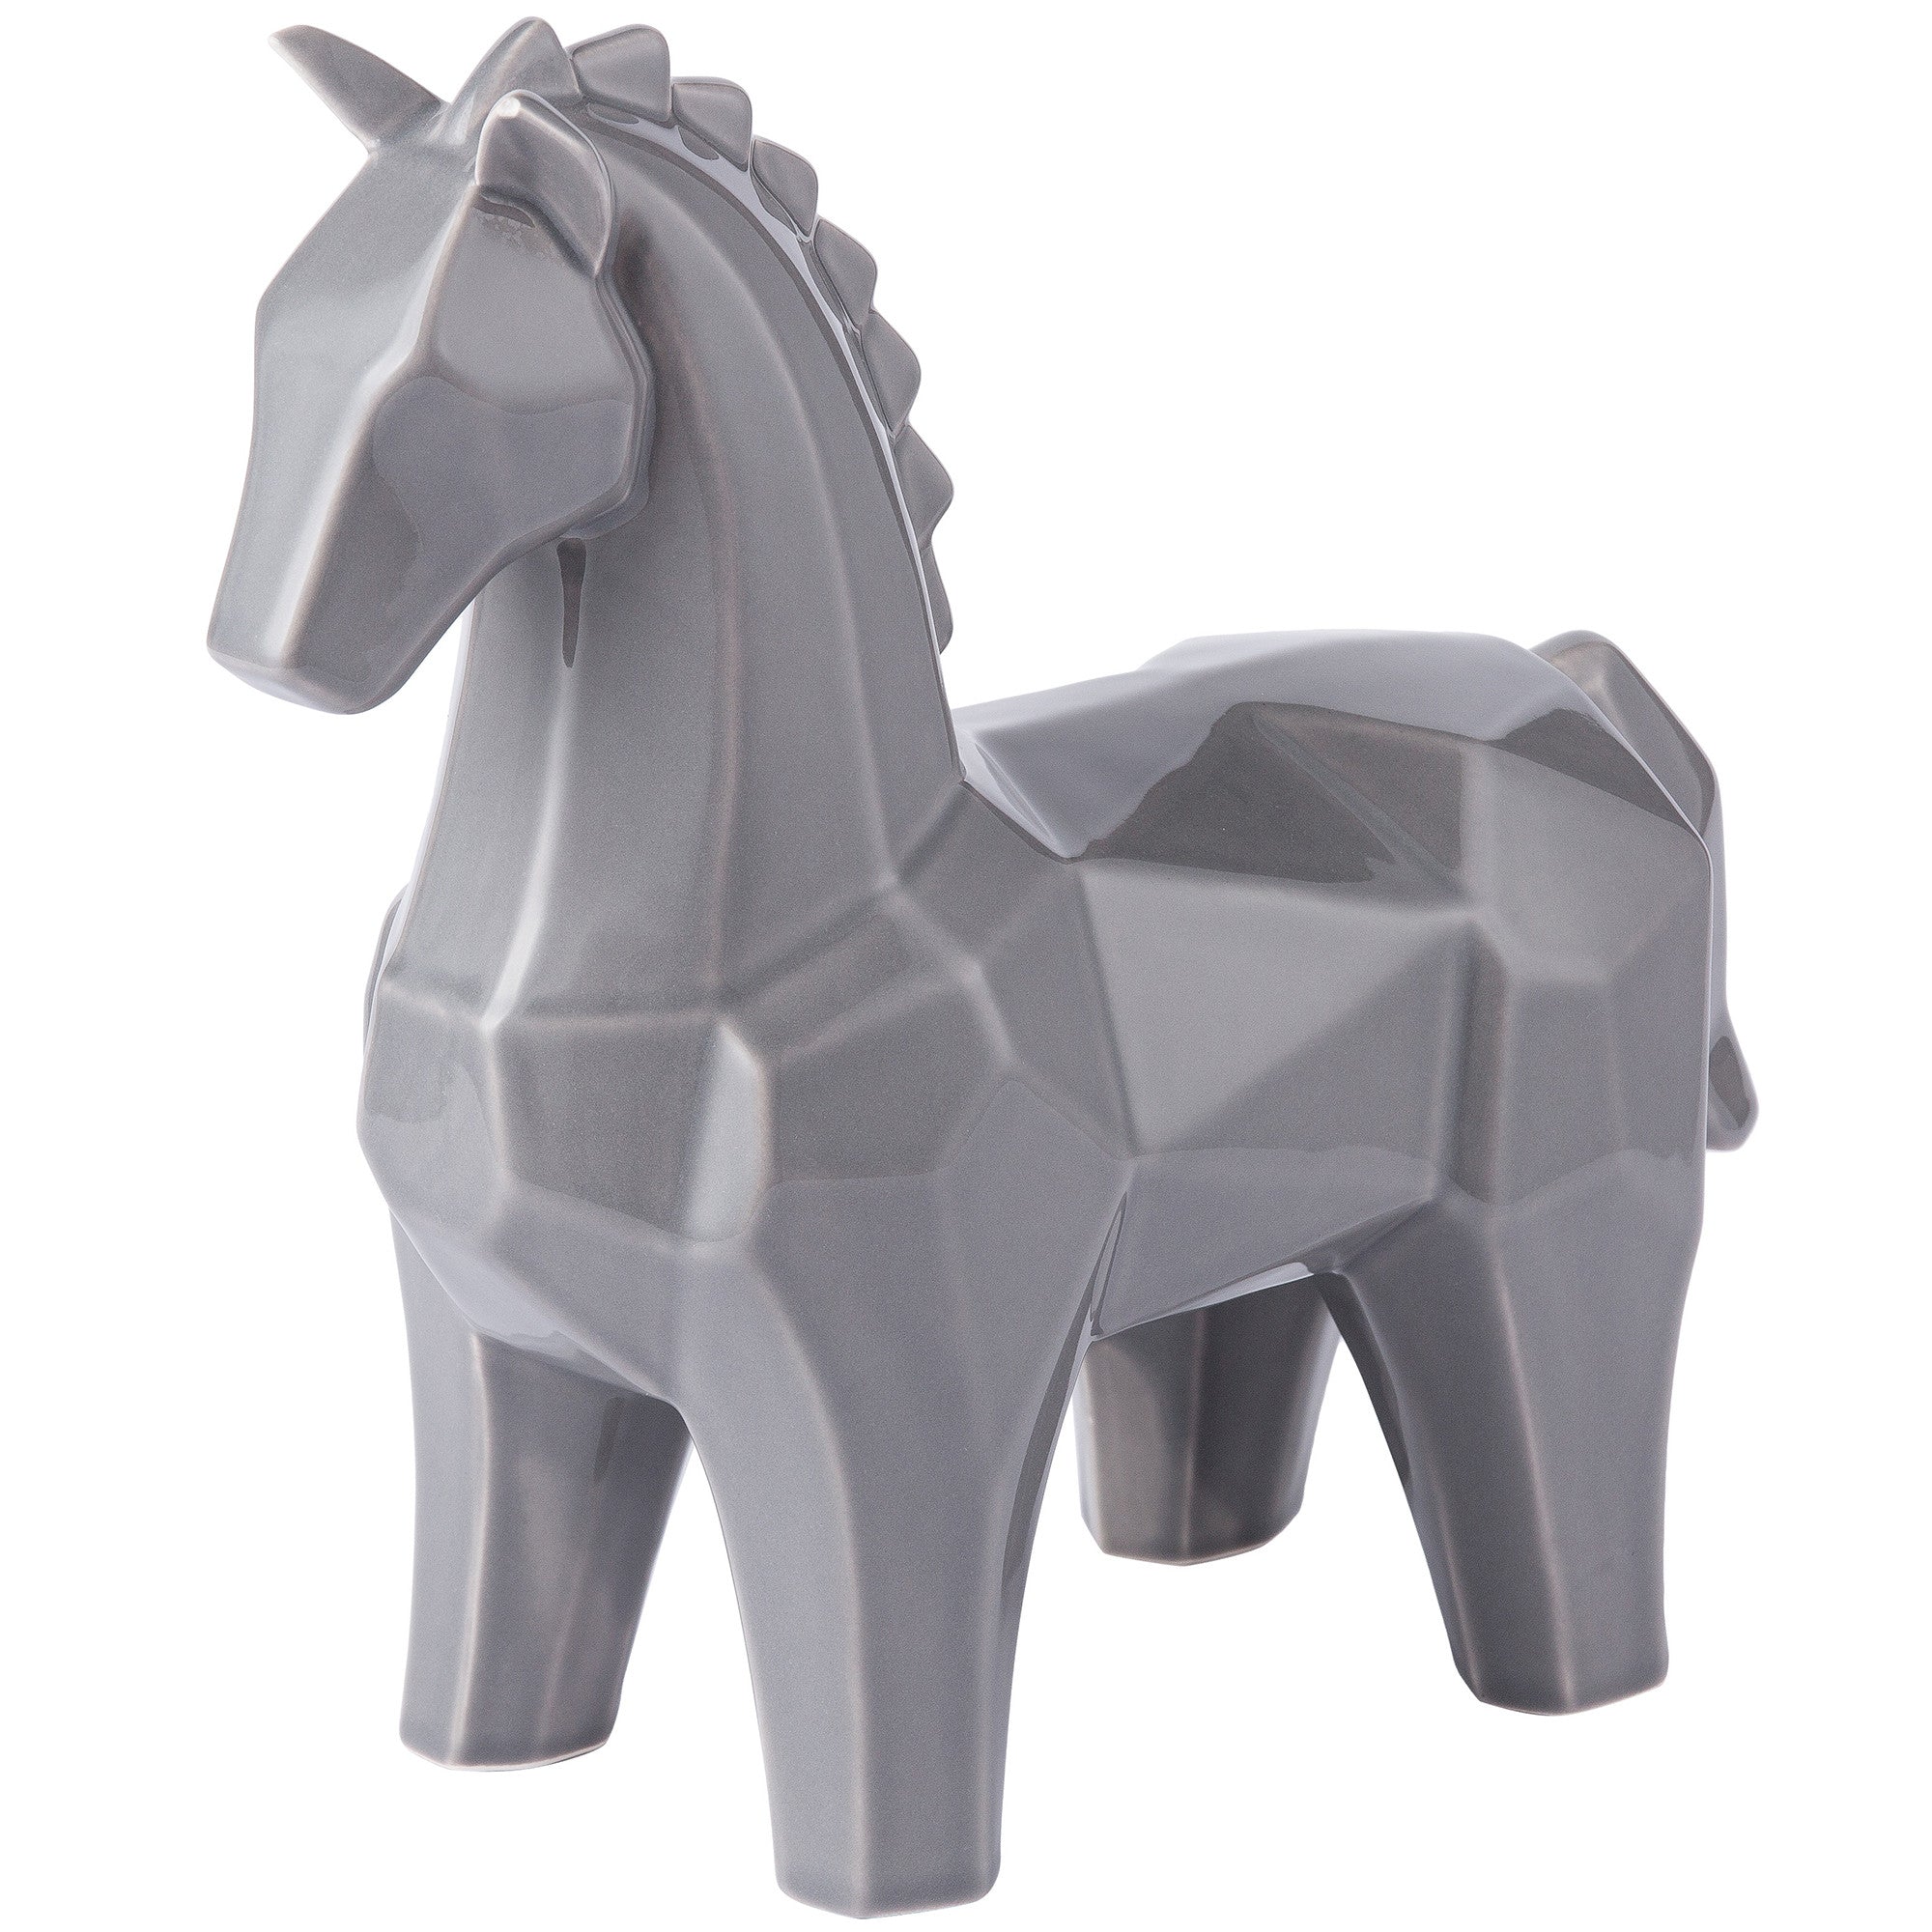 Origami Zoo 401a13gr Collectible Ceramic Horse Statue Gray